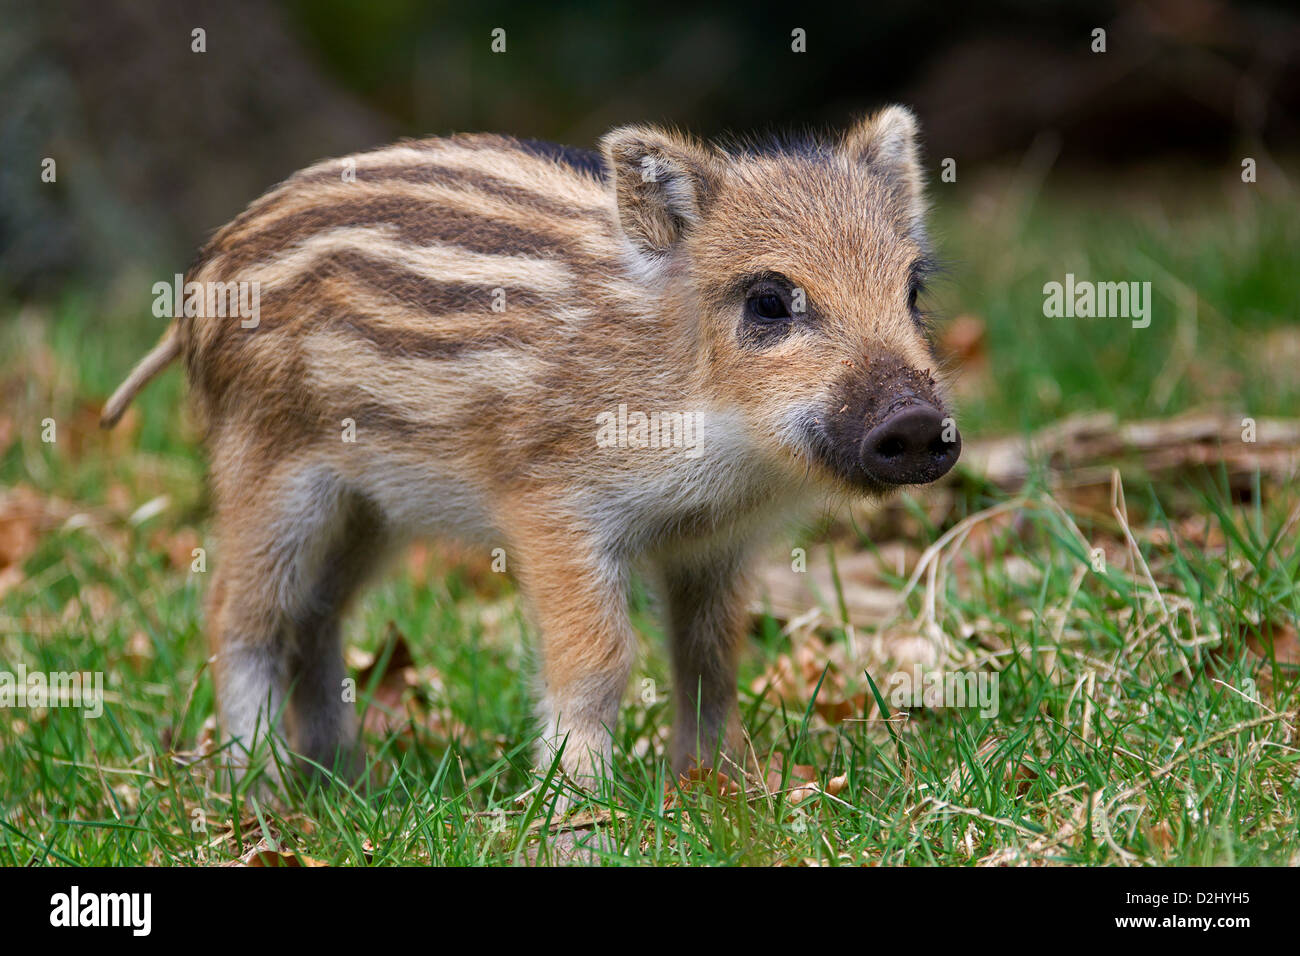 Wild boar (Sus scrofa) piglet showing striped coat in forest in spring, Germany Stock Photo